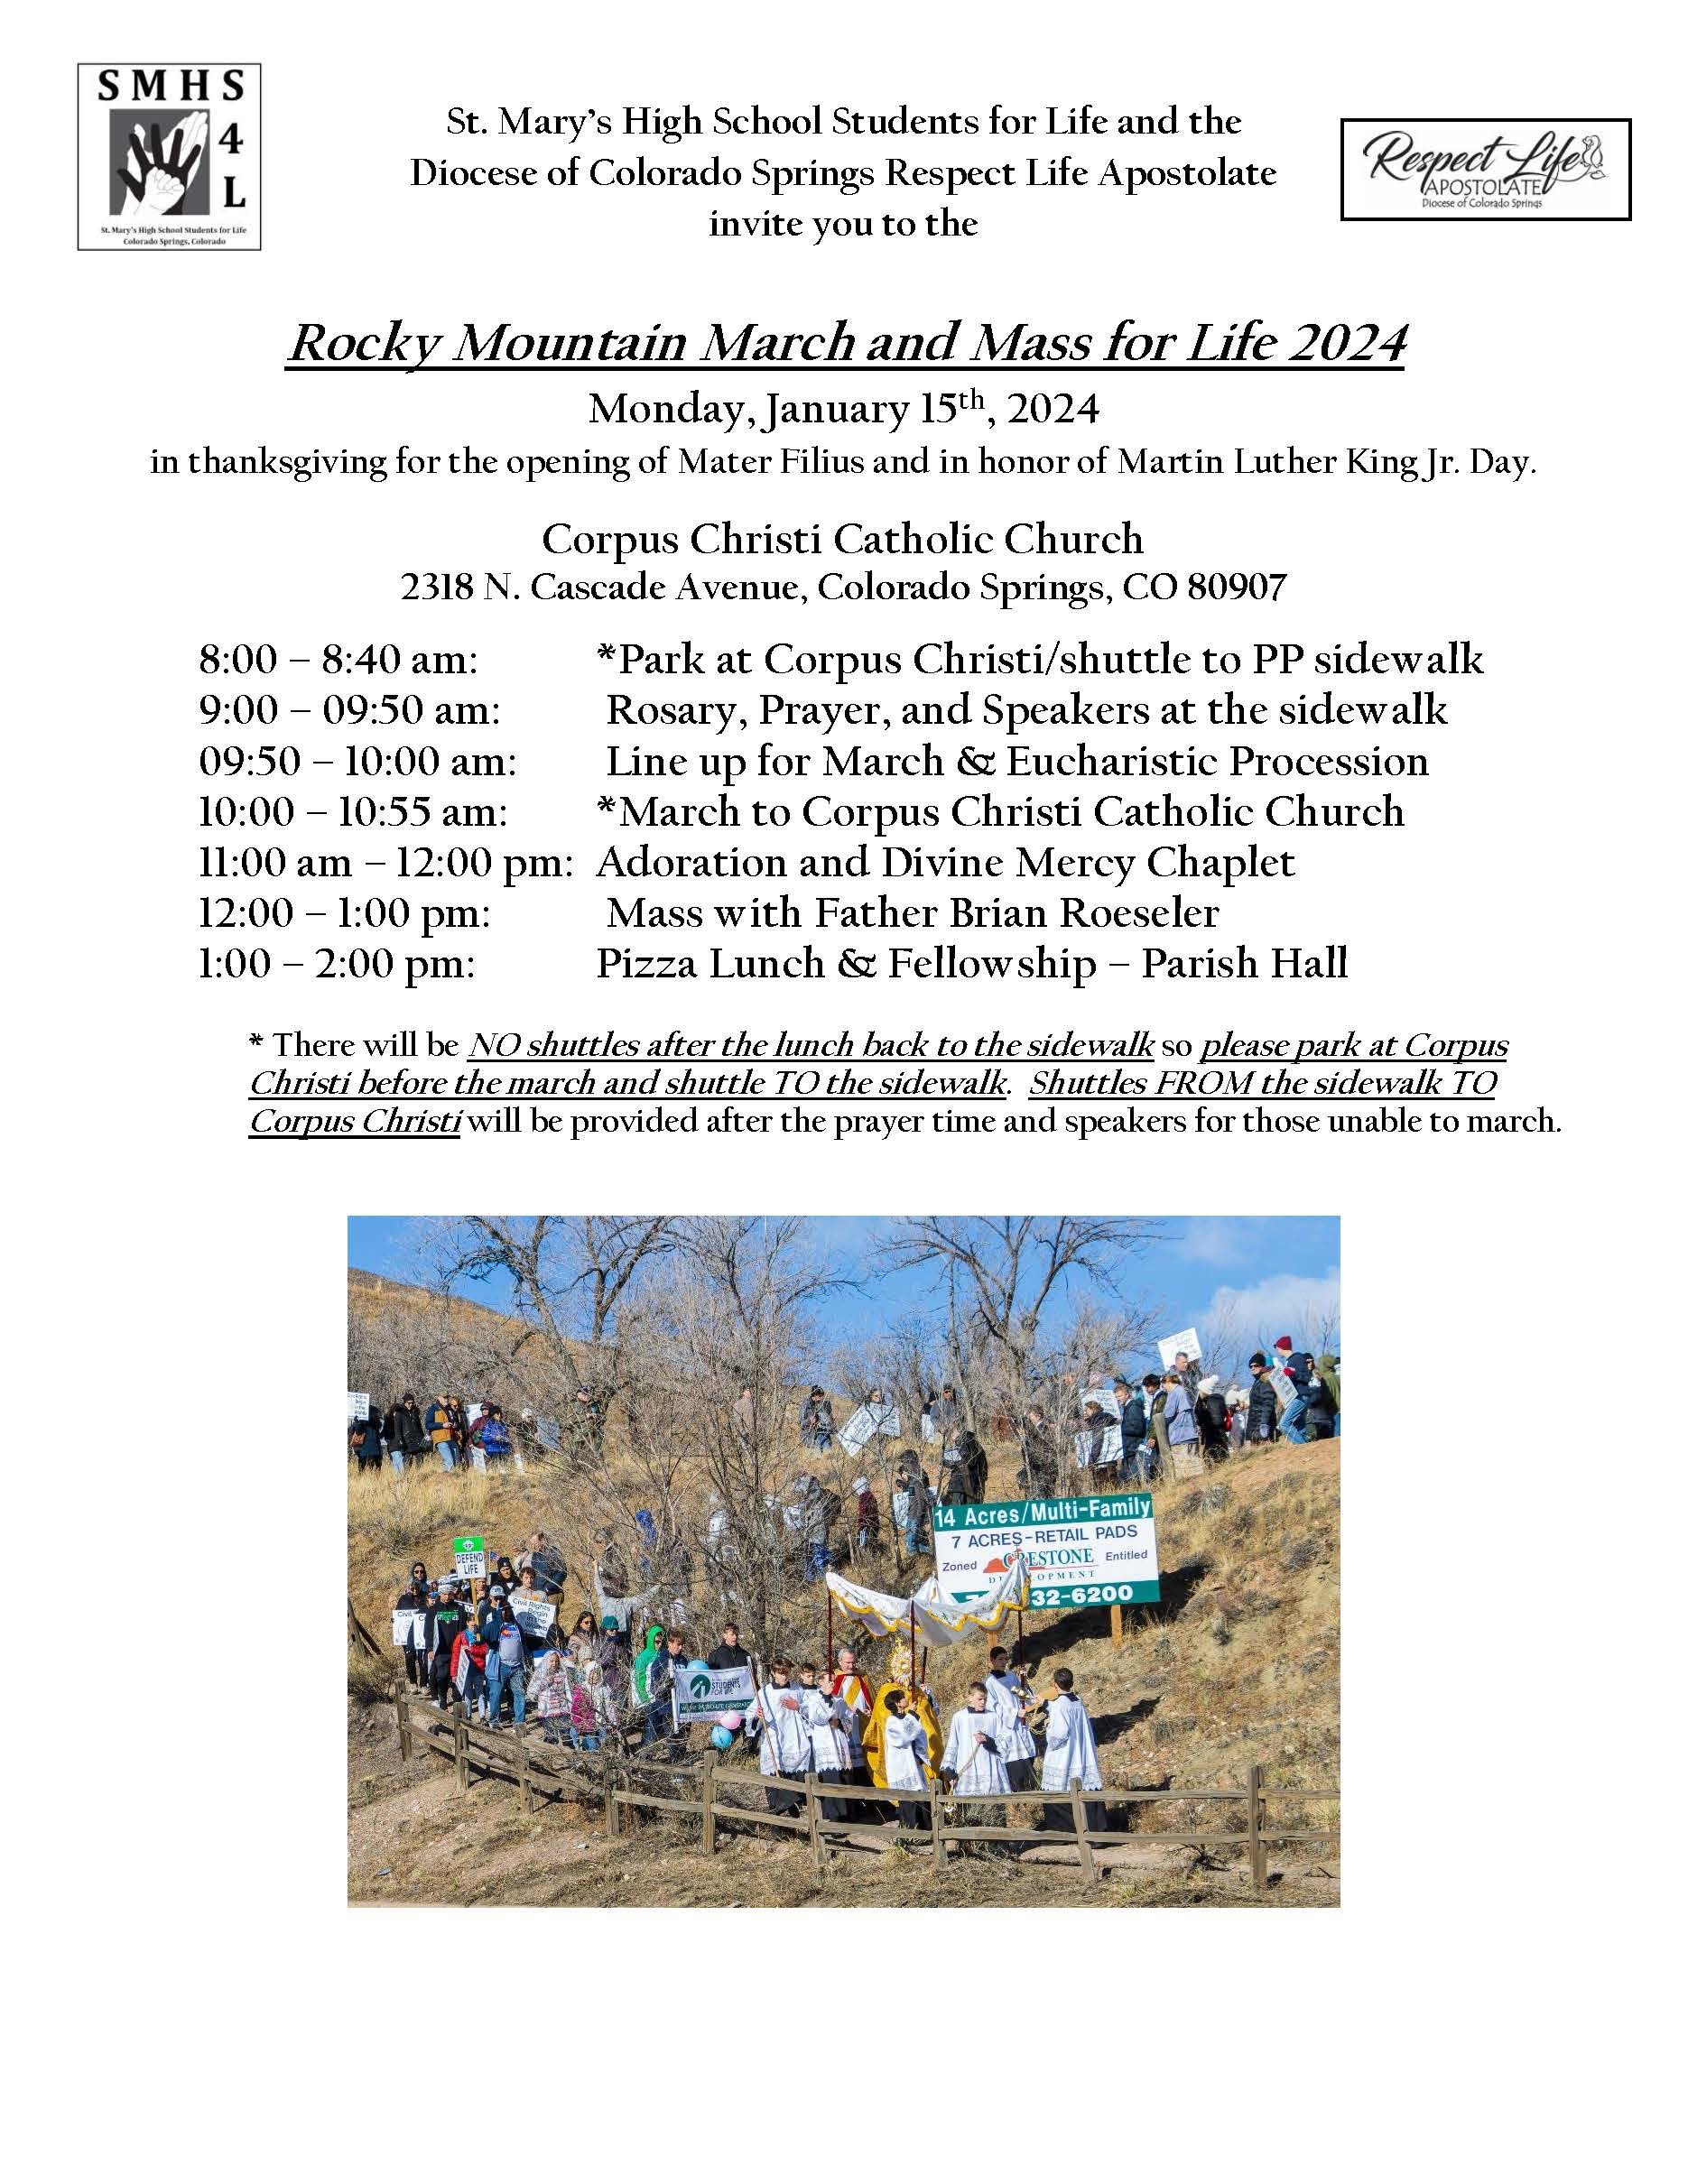 Rocky Mountain March and Mass for Life 2024